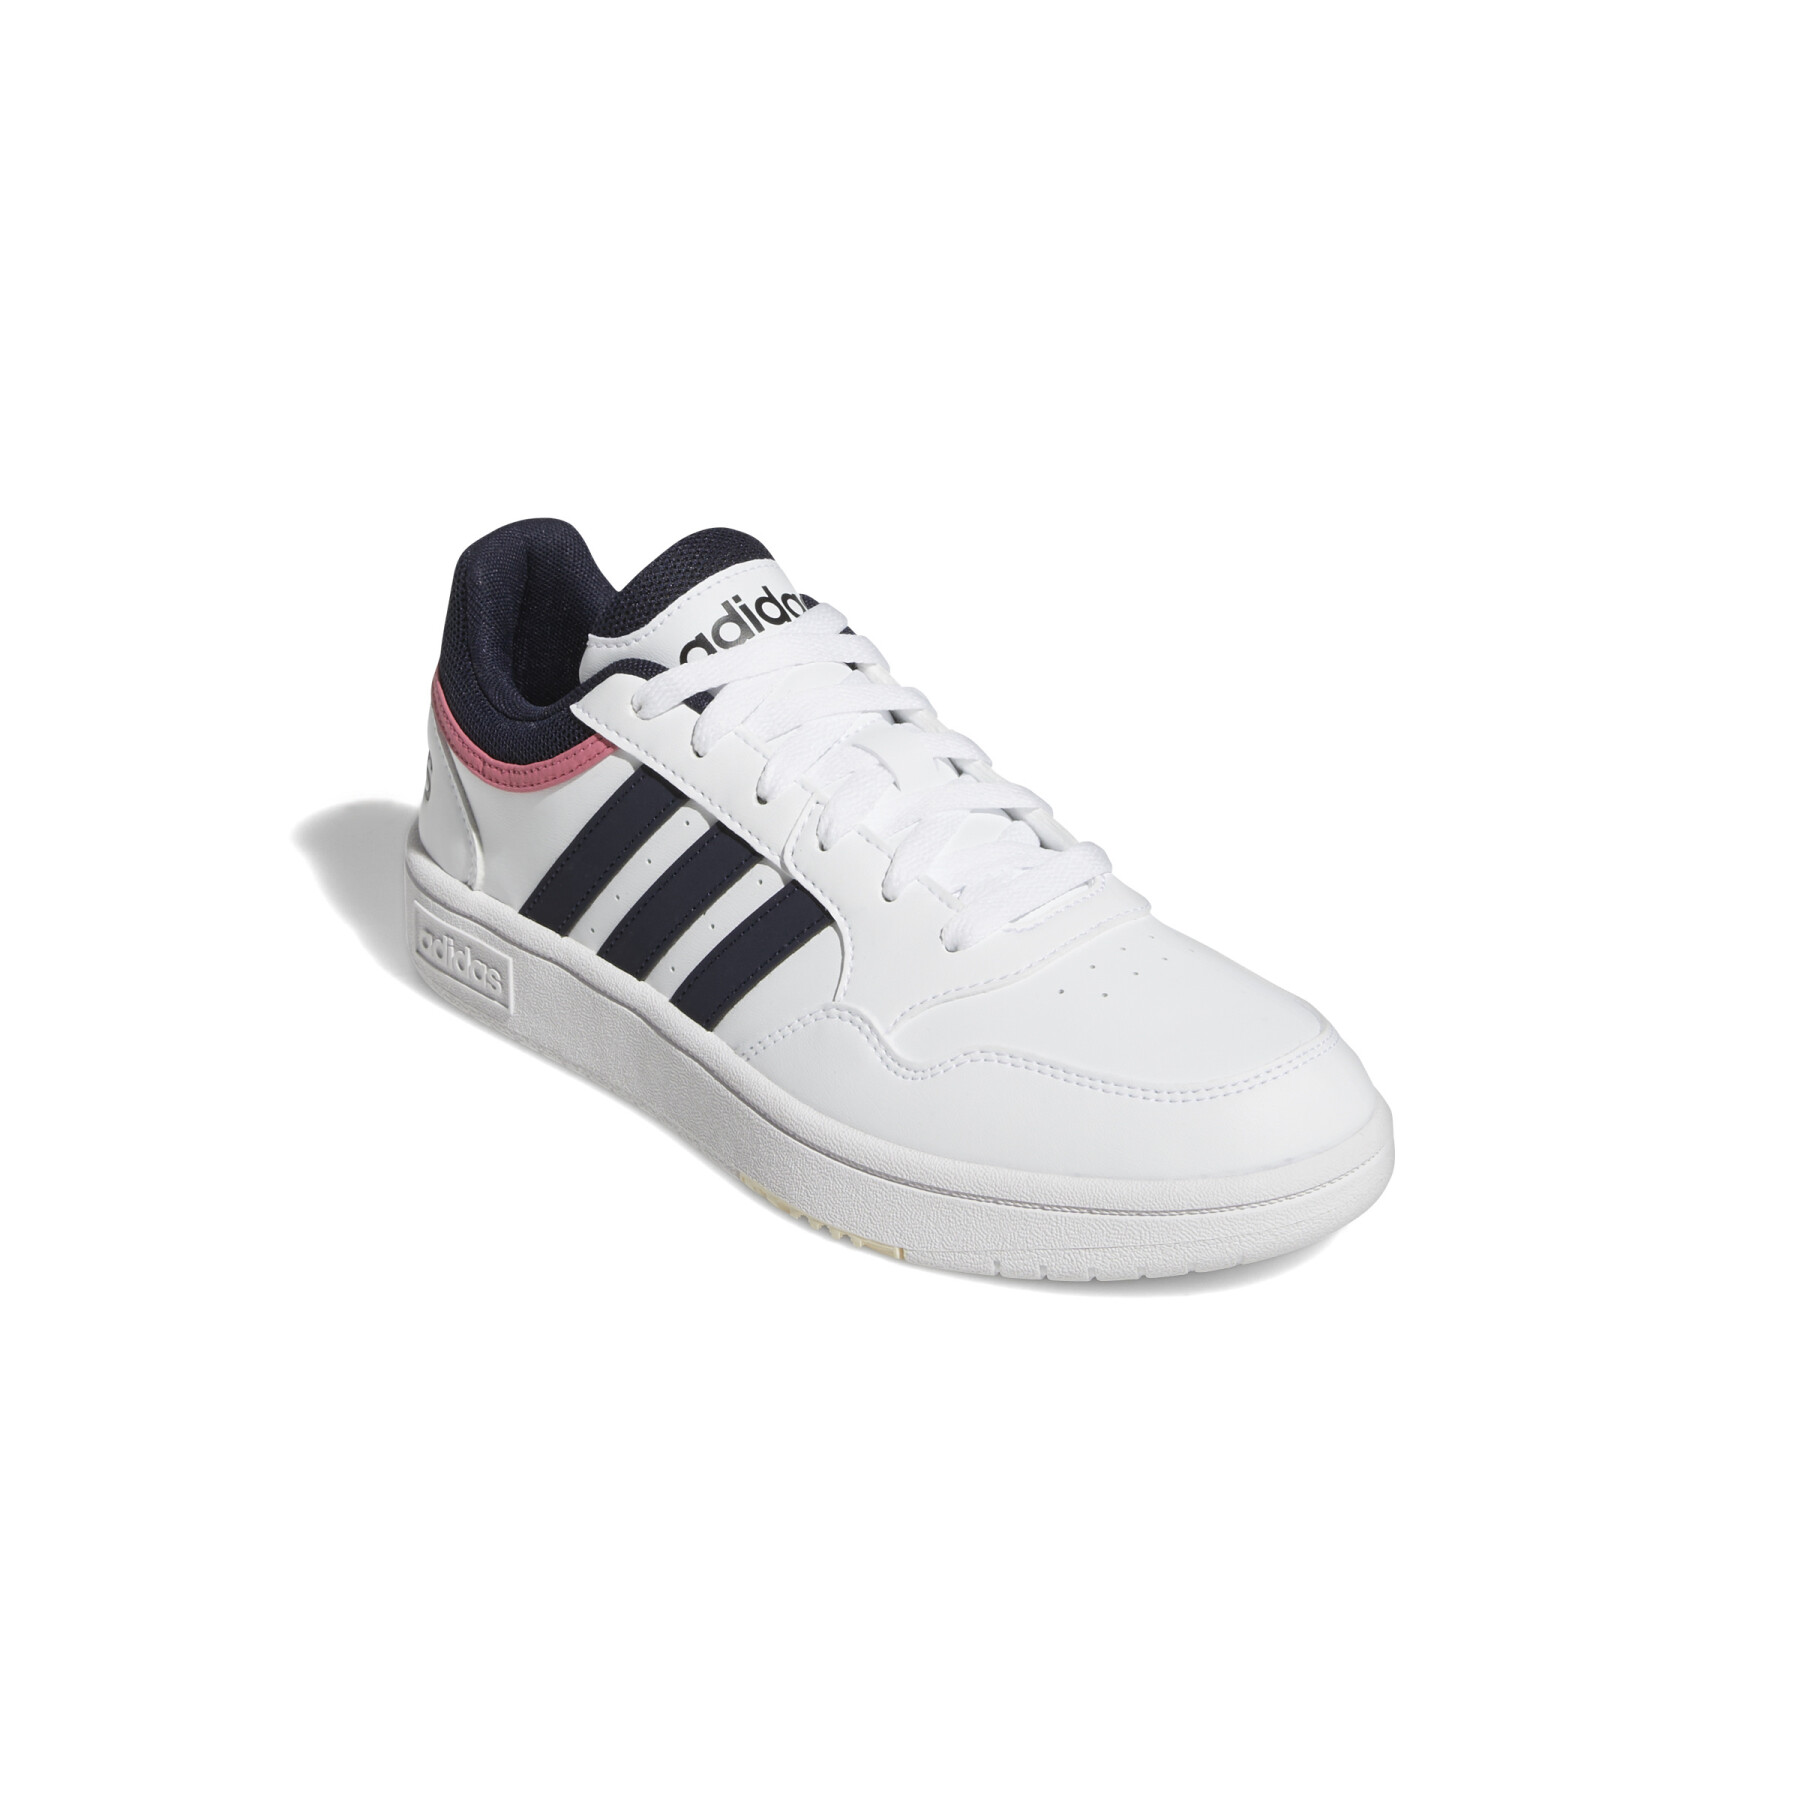 Baskets femme adidas Hoops 3.0 Low Classic